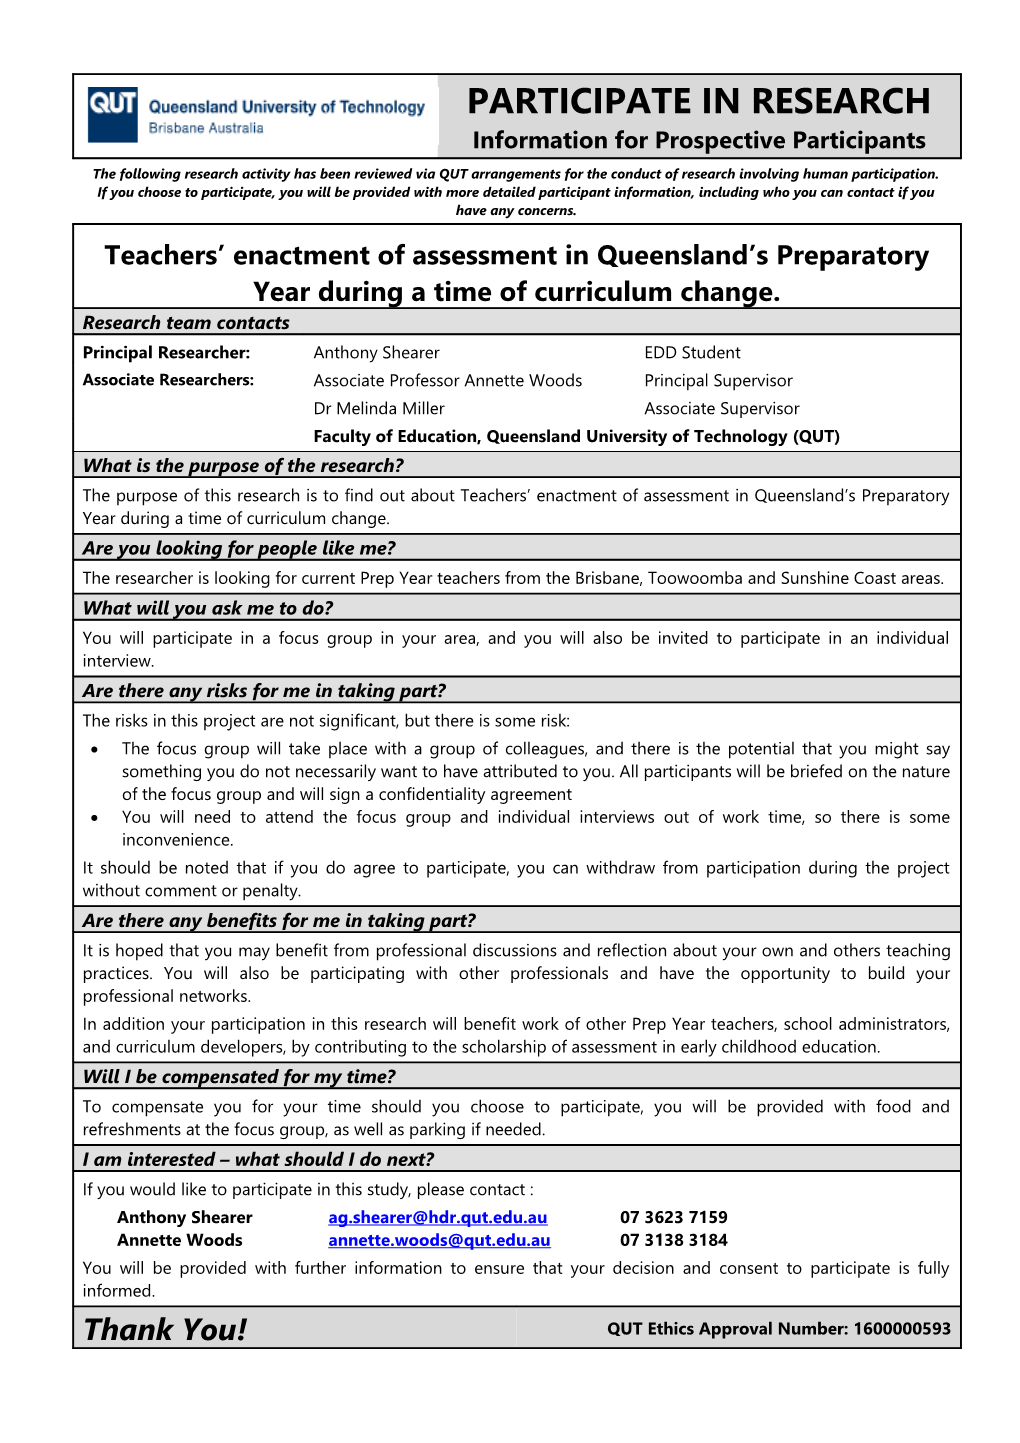 QUT Process for Advertising for Research Participants